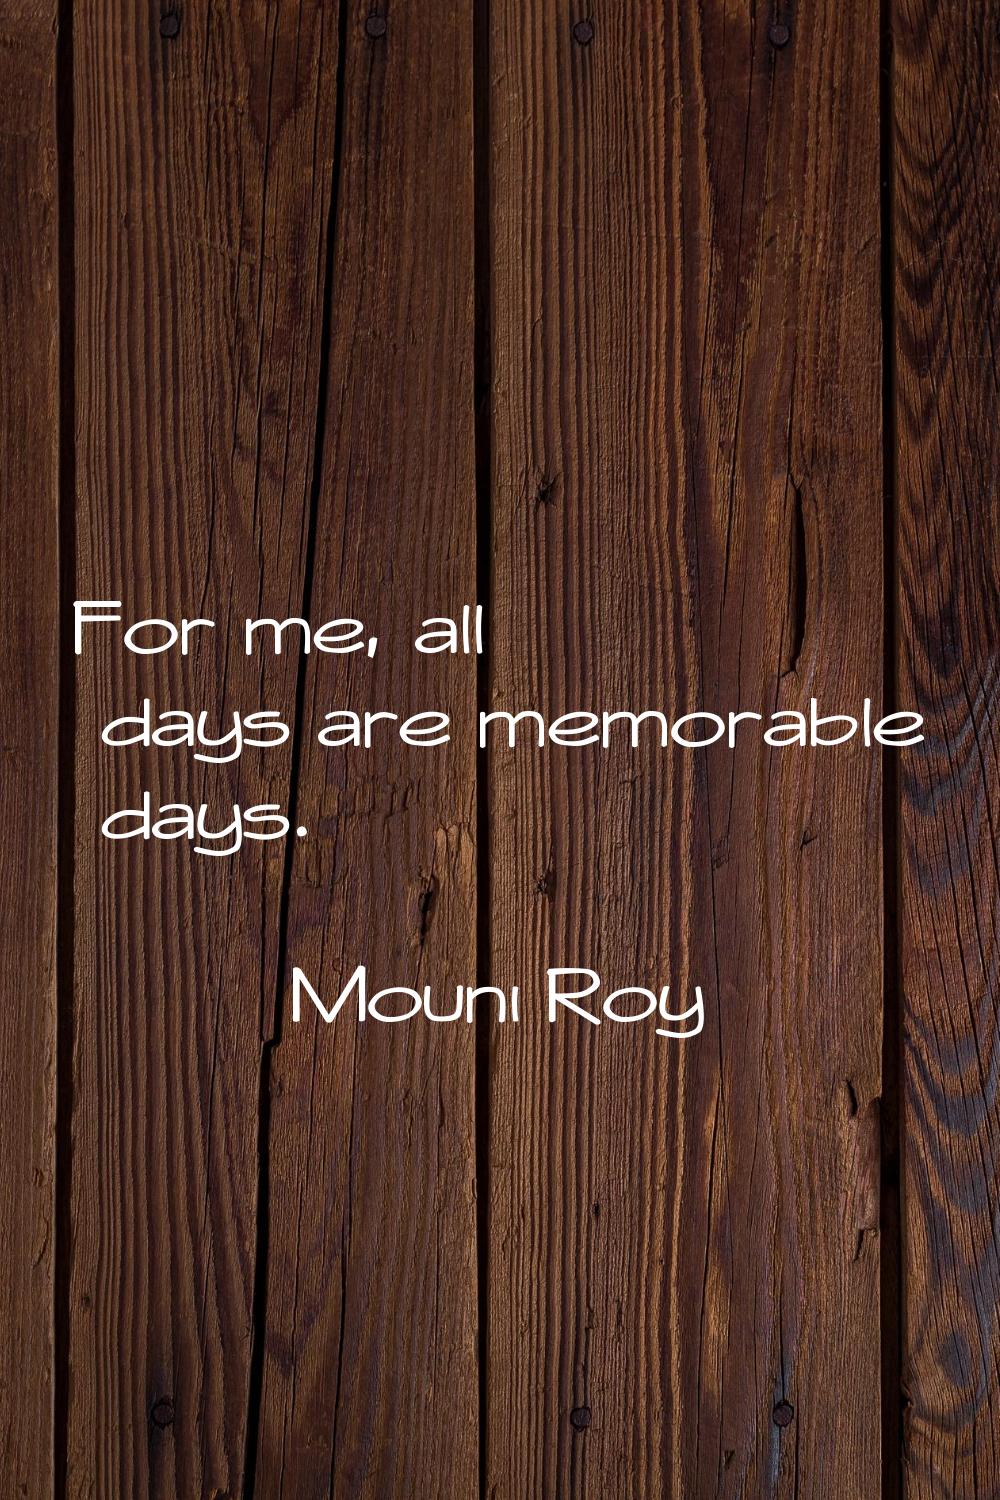 For me, all days are memorable days.